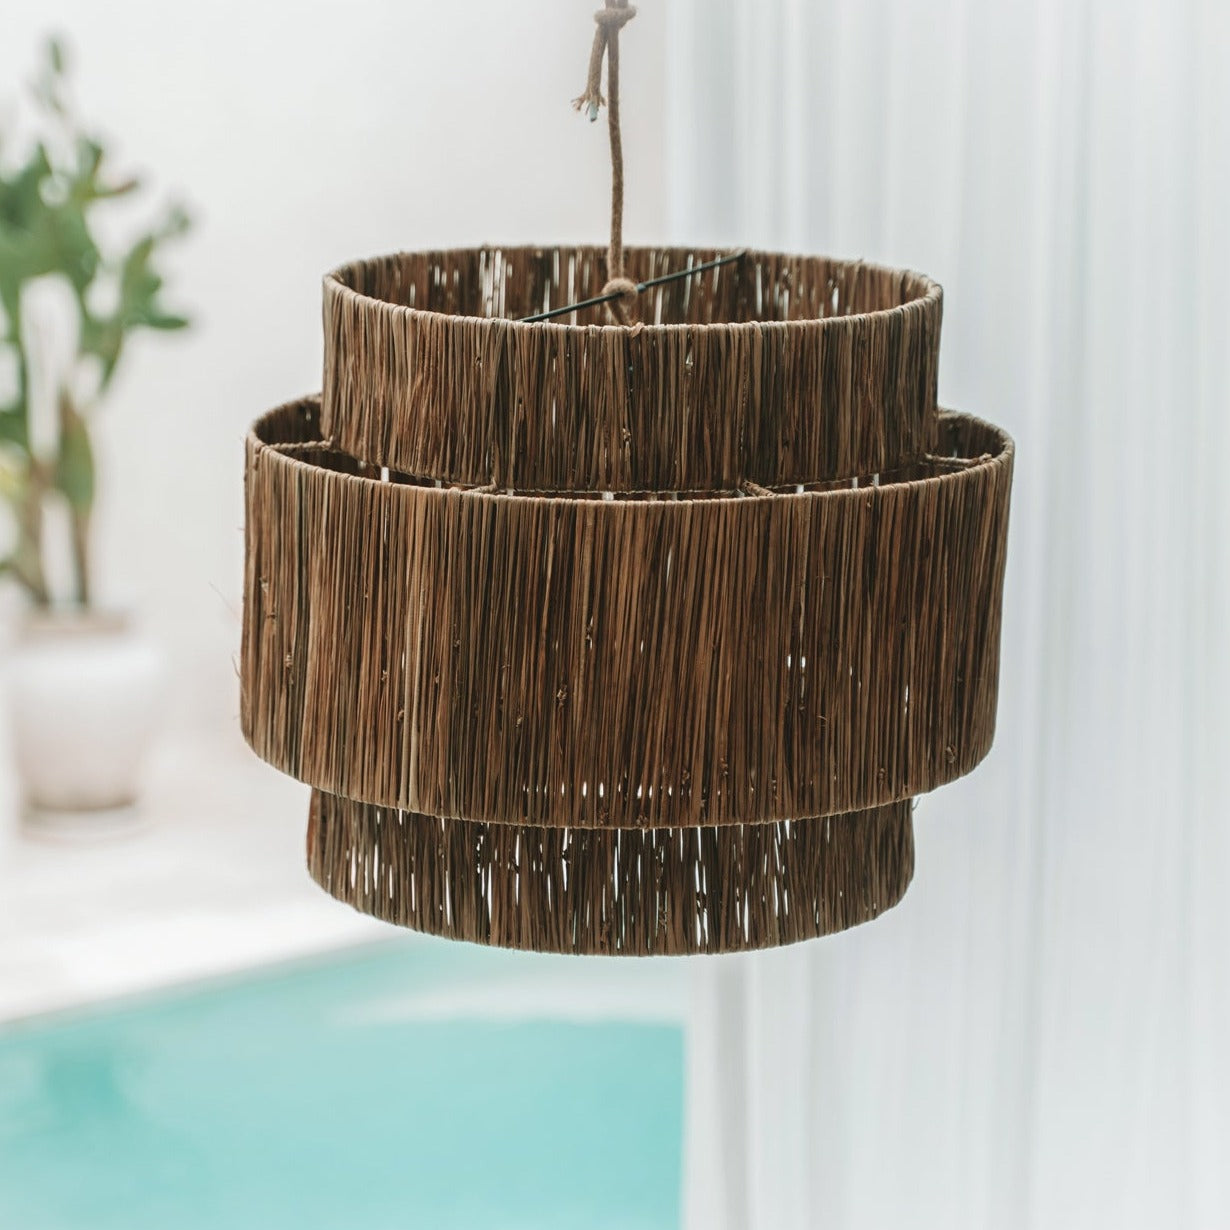 THE STYLISH Pendant Natural outdoor view